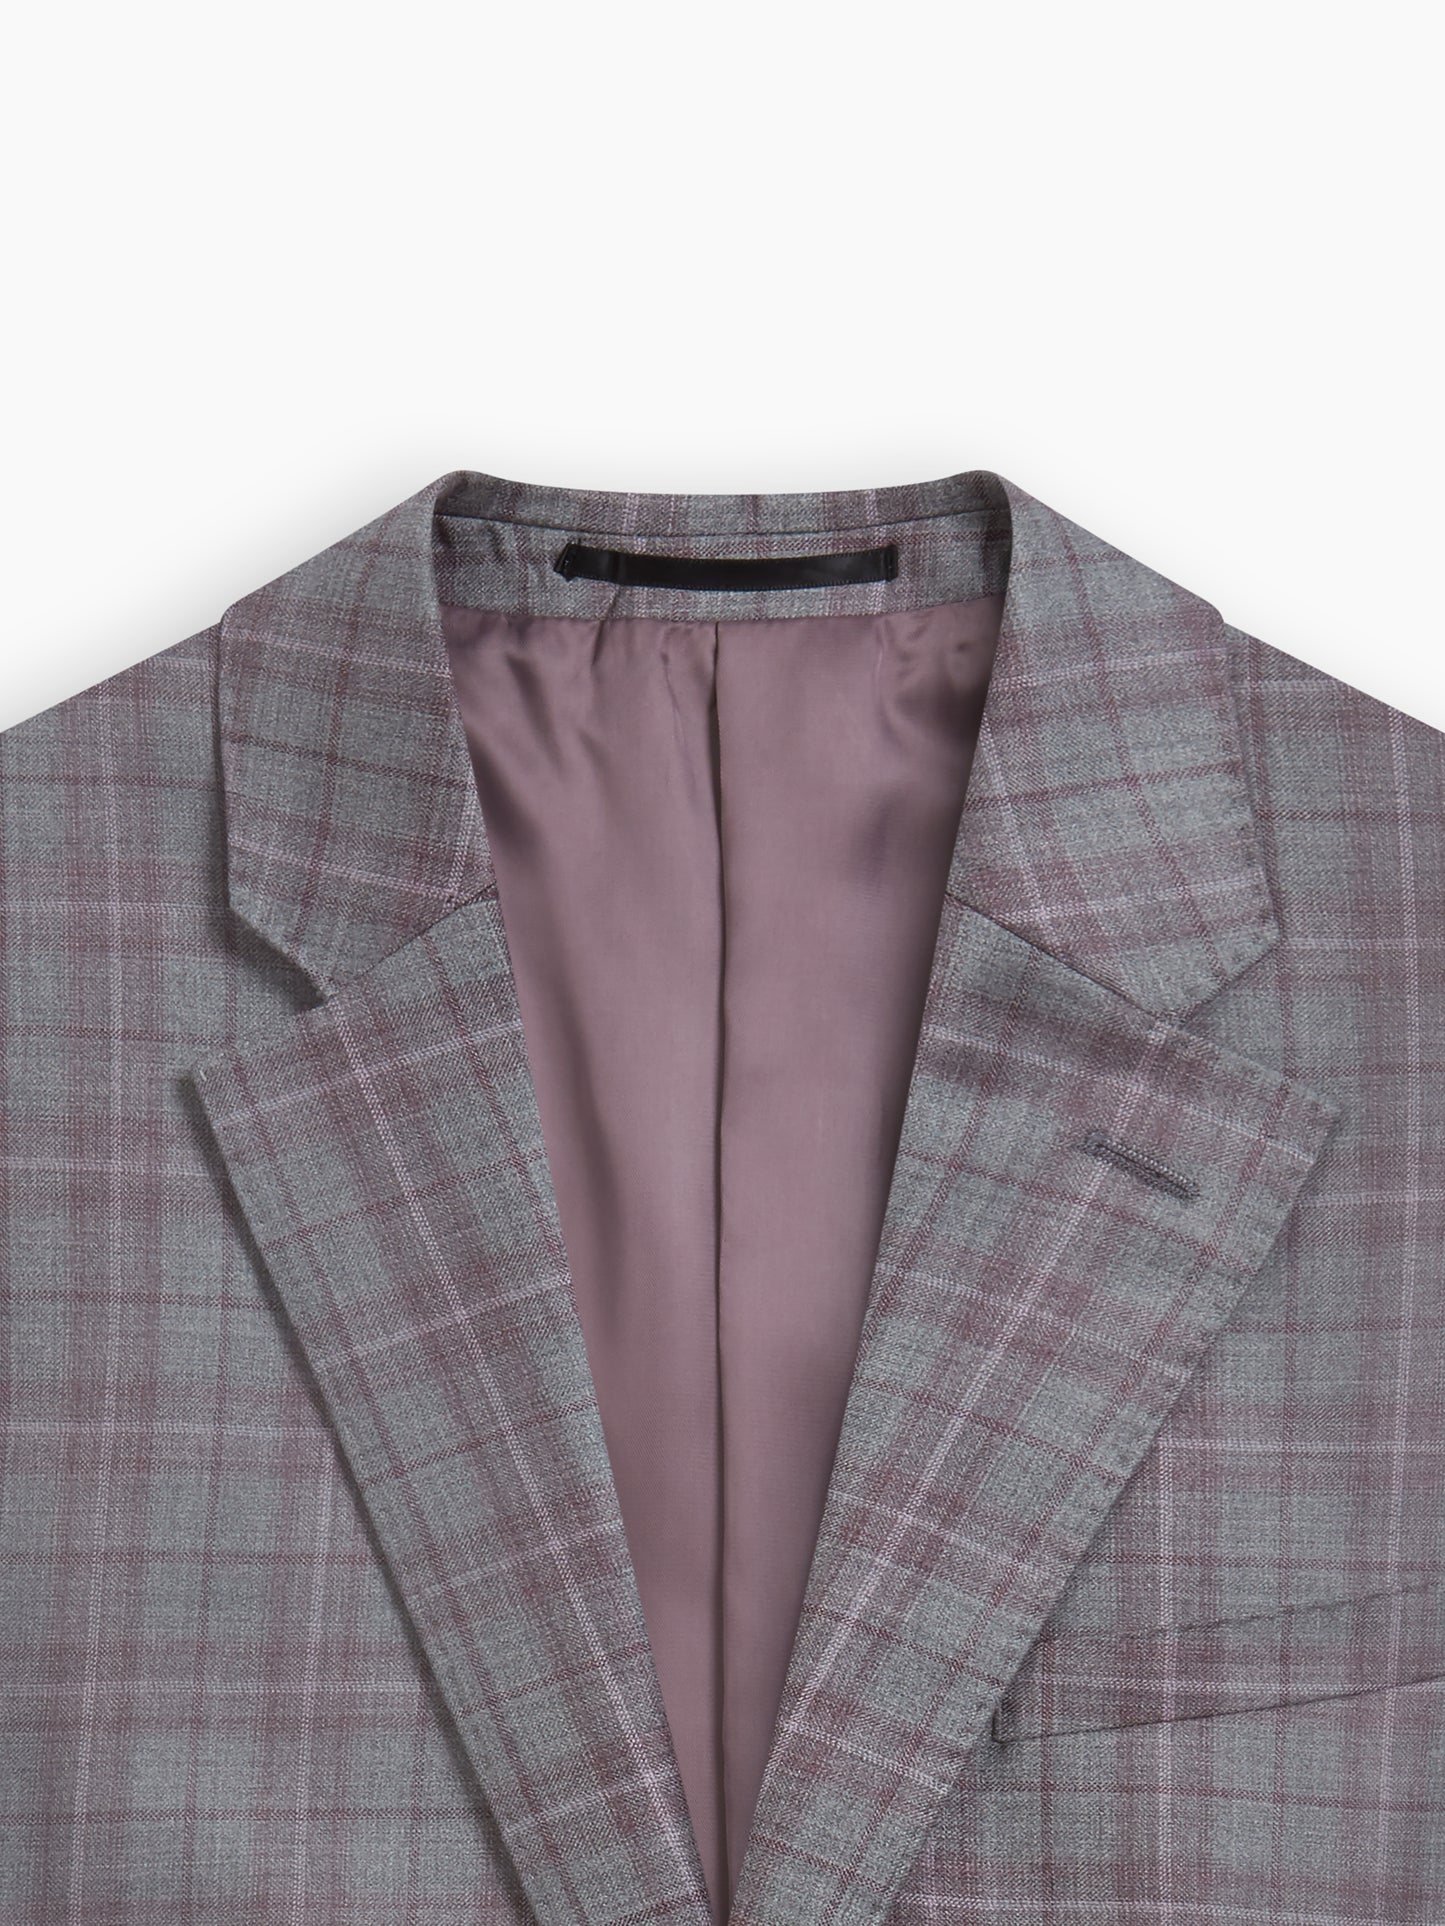 Highgrove Woven in Italy Slim Fit Grey Check Jacket